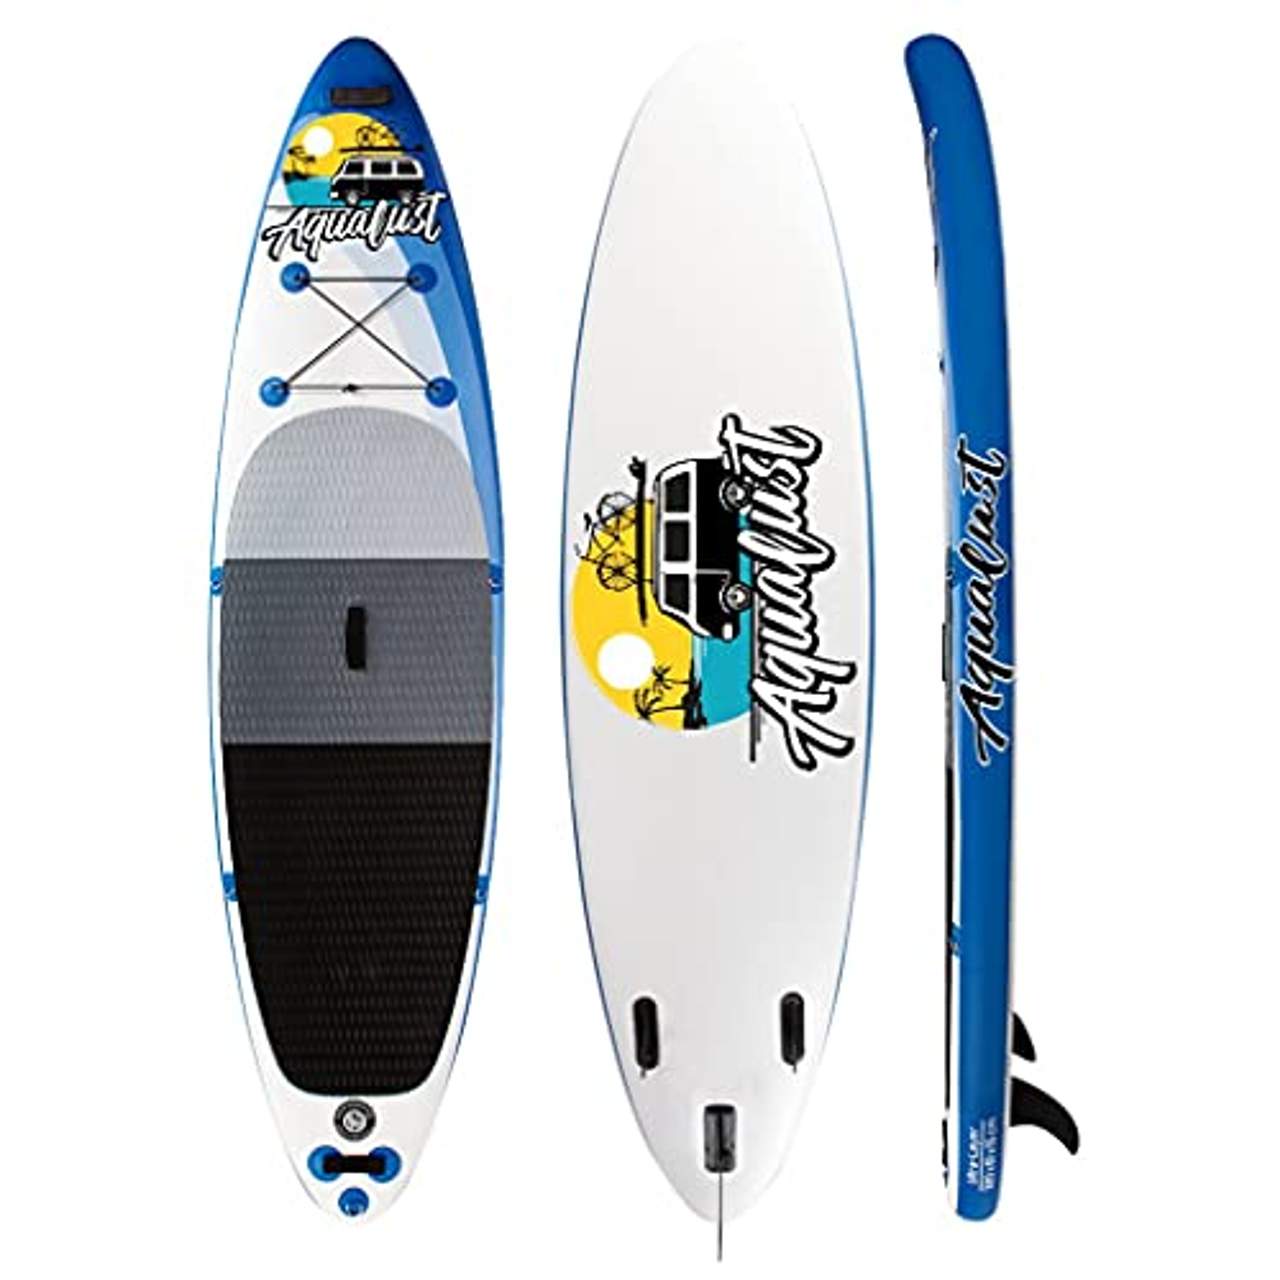 AQUALUST 10'6" SUP Board Stand Up Paddle Surf-Board BlueDrive S Power